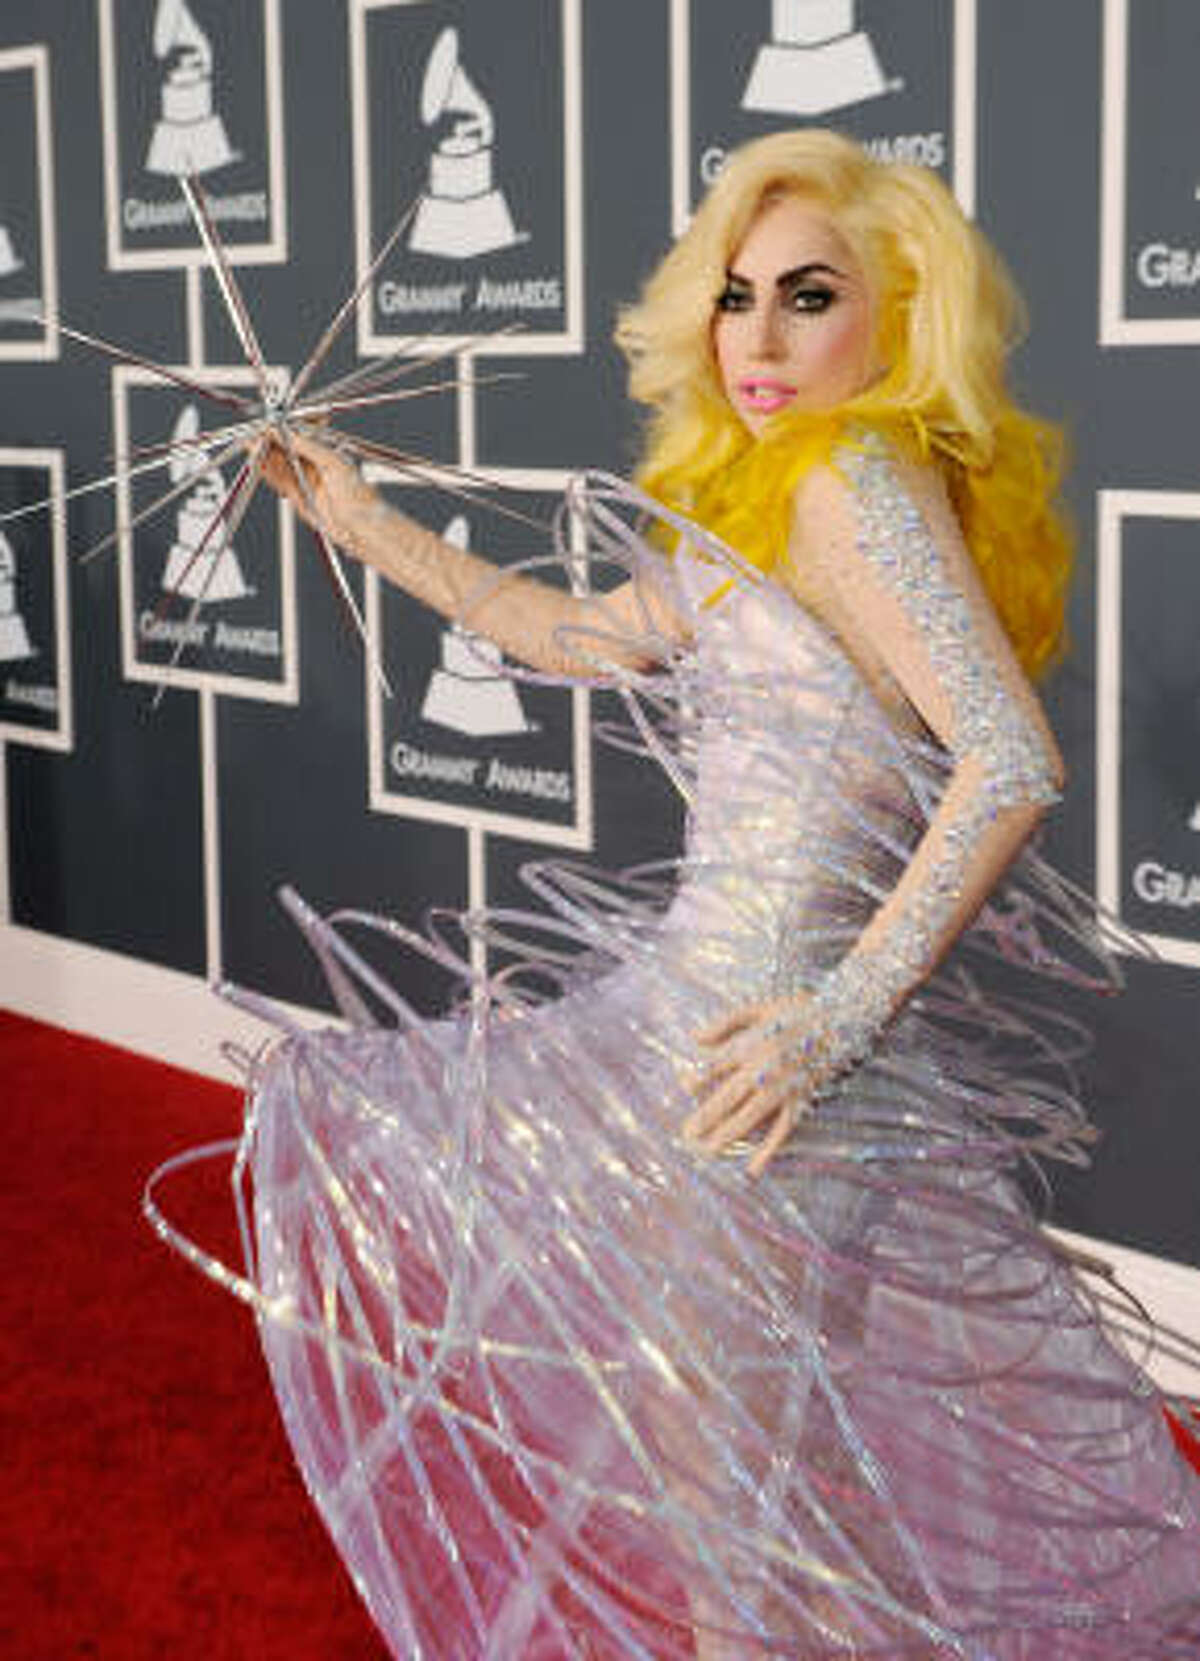 Lady Gaga, in celestial attire, made her strangely intriguing entrance. She even brought her own star.